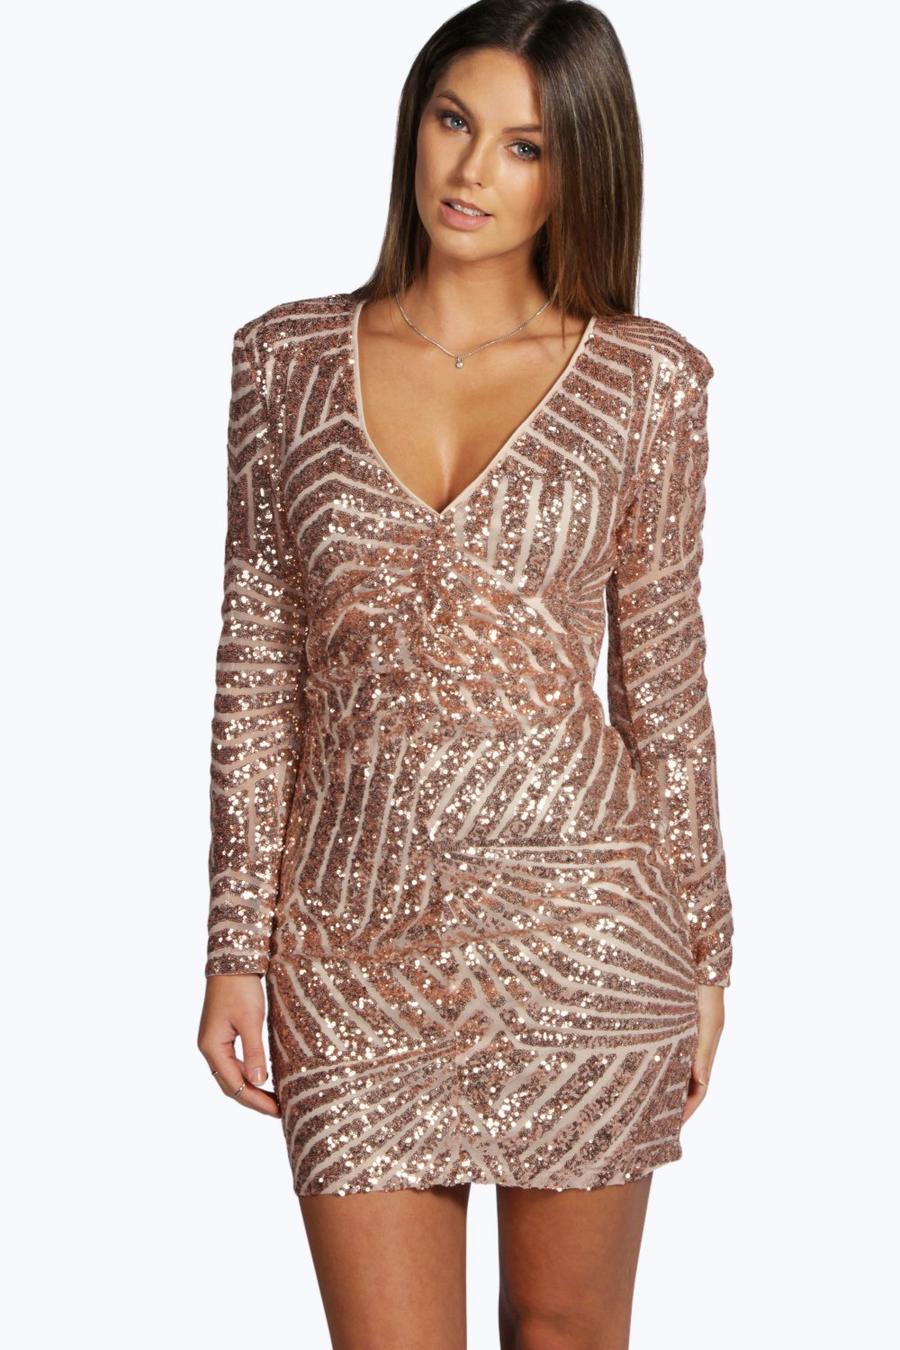 Nude Boutique Sequin Paneled Bodycon Party Dress